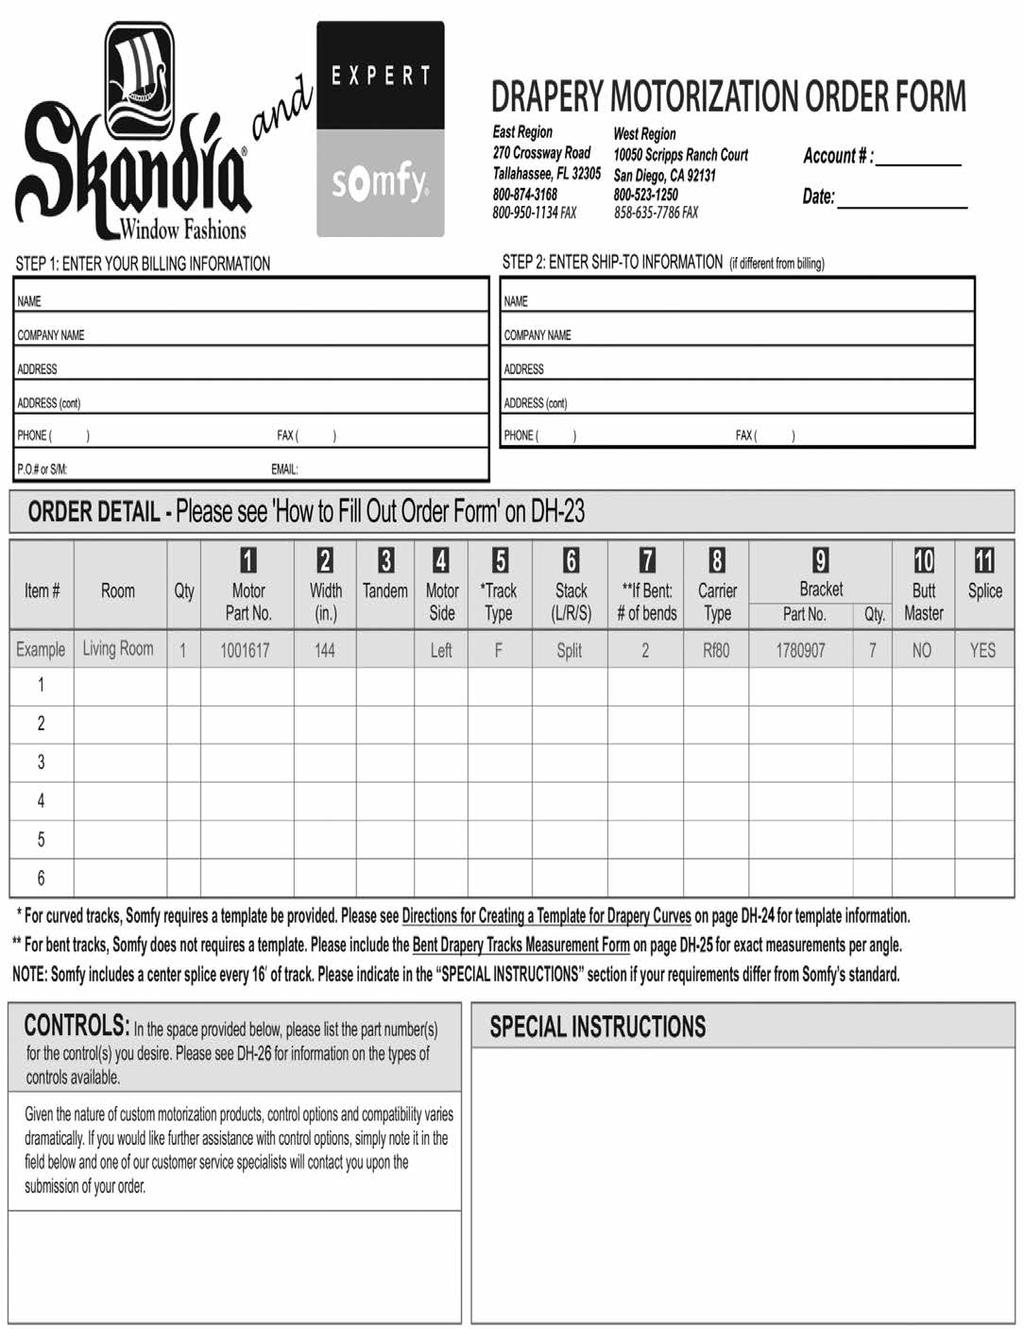 DH-22 Order Form